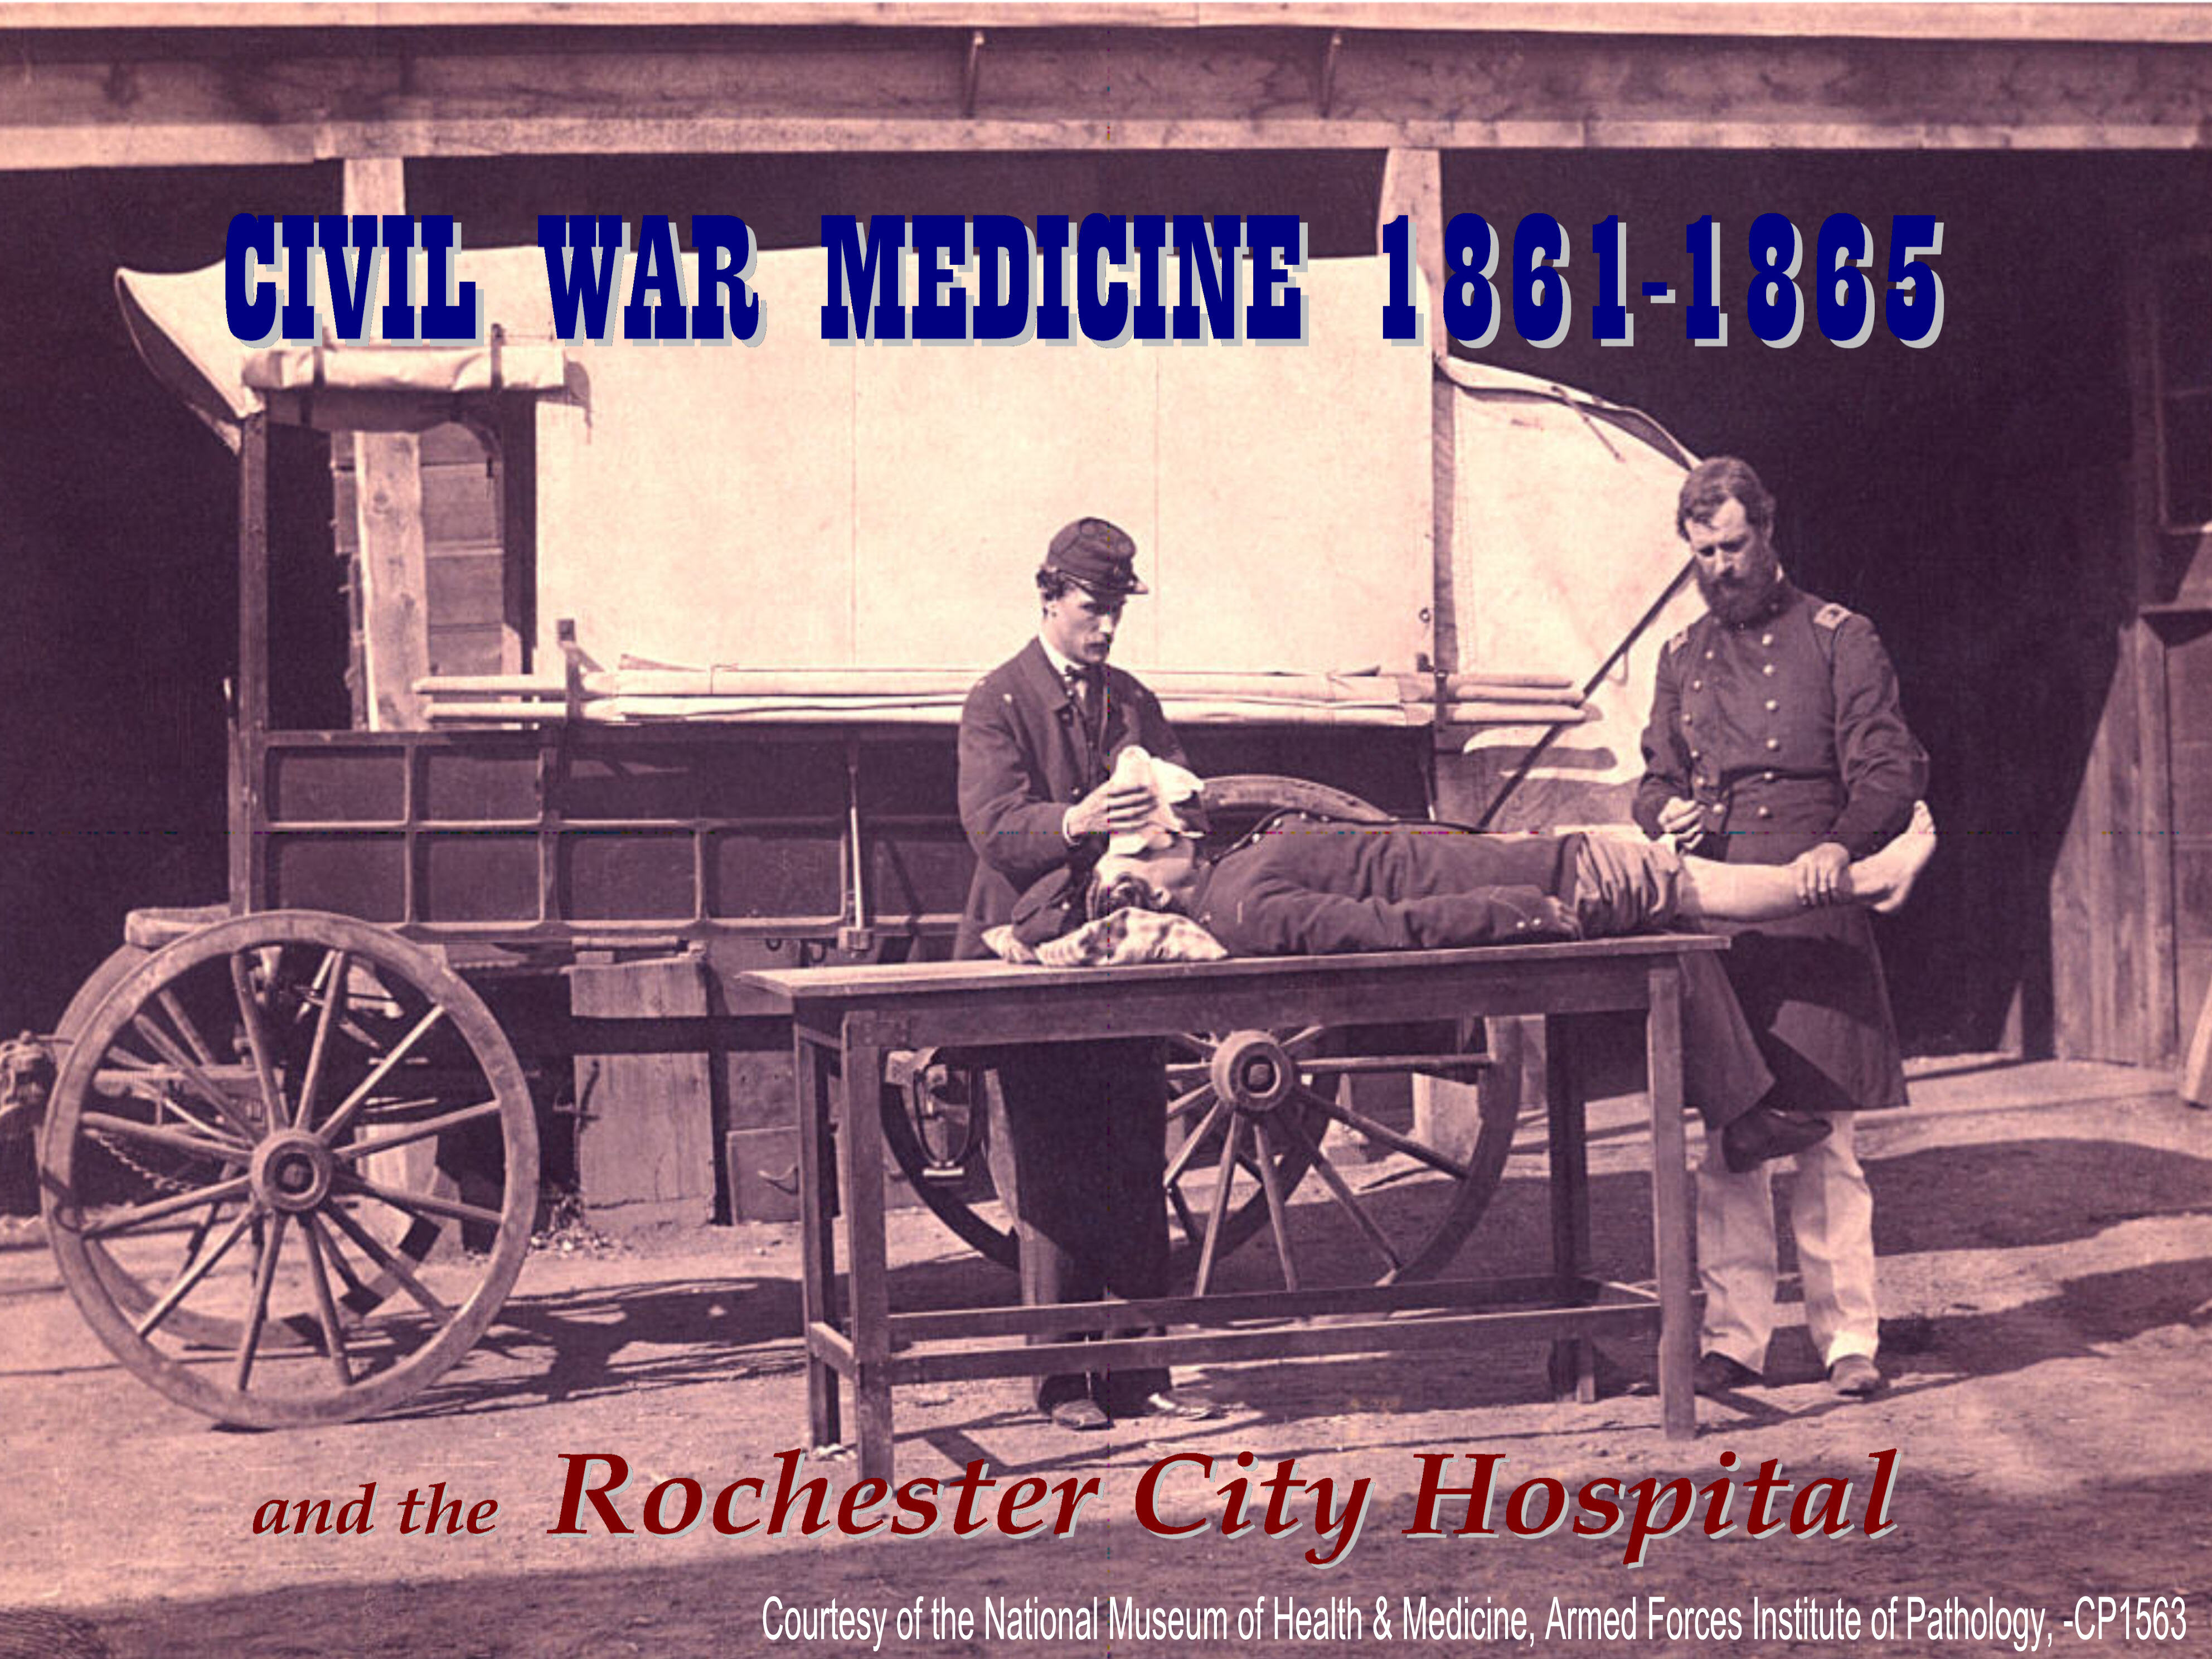 The museum offers many digital collections, including this exhibit about the medical history of the Civil War. Click the "Digital Exhibits" link at the bottom of the page to learn more. 